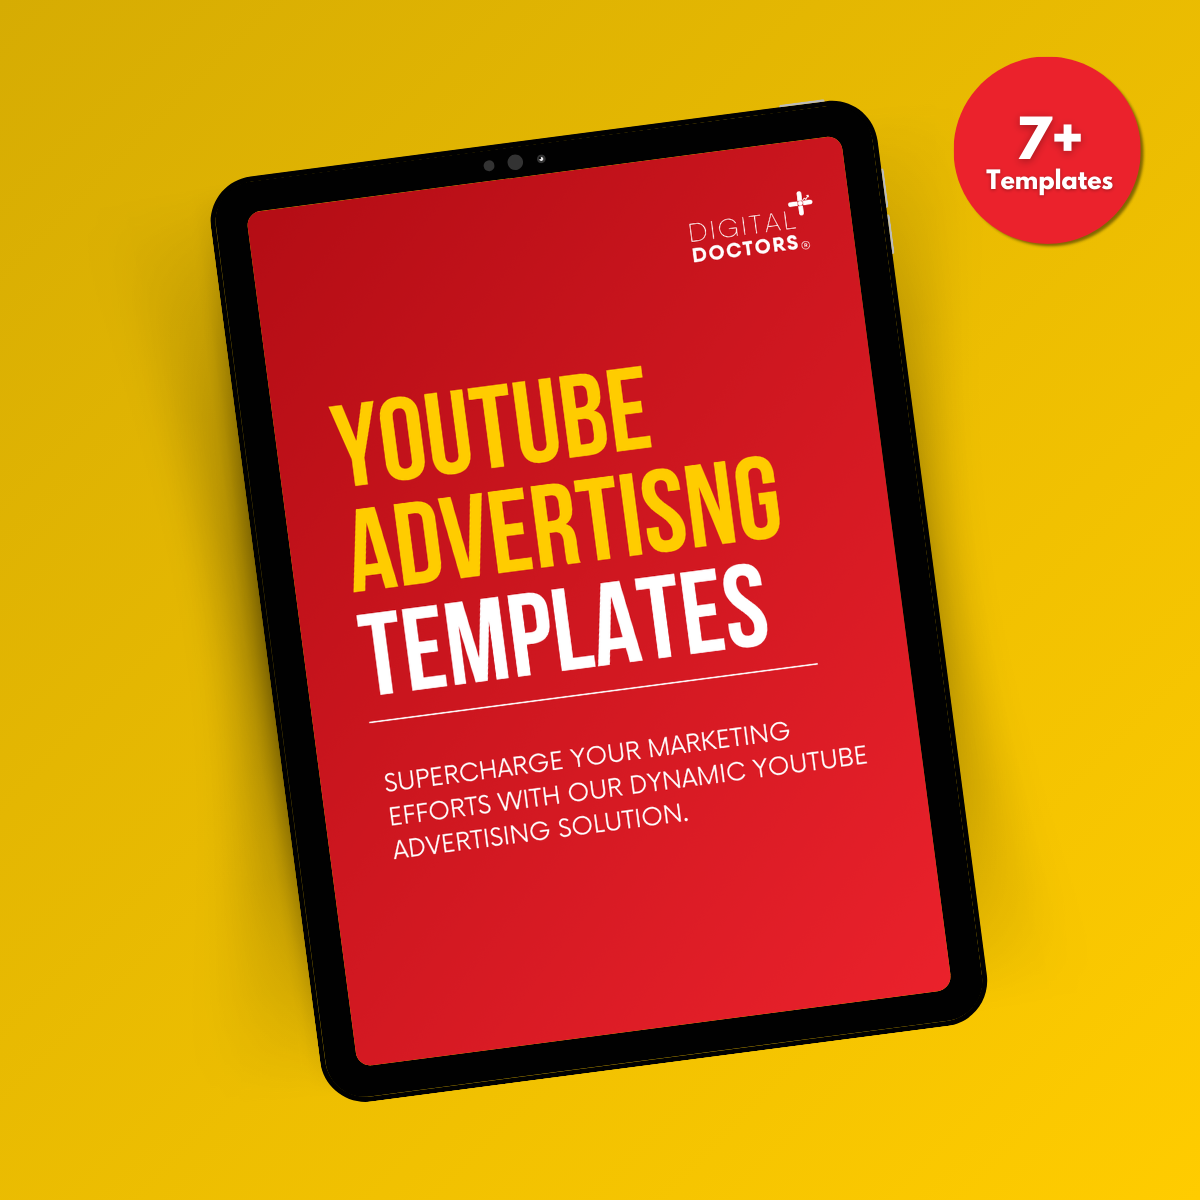 YouTube Advertisng Templates